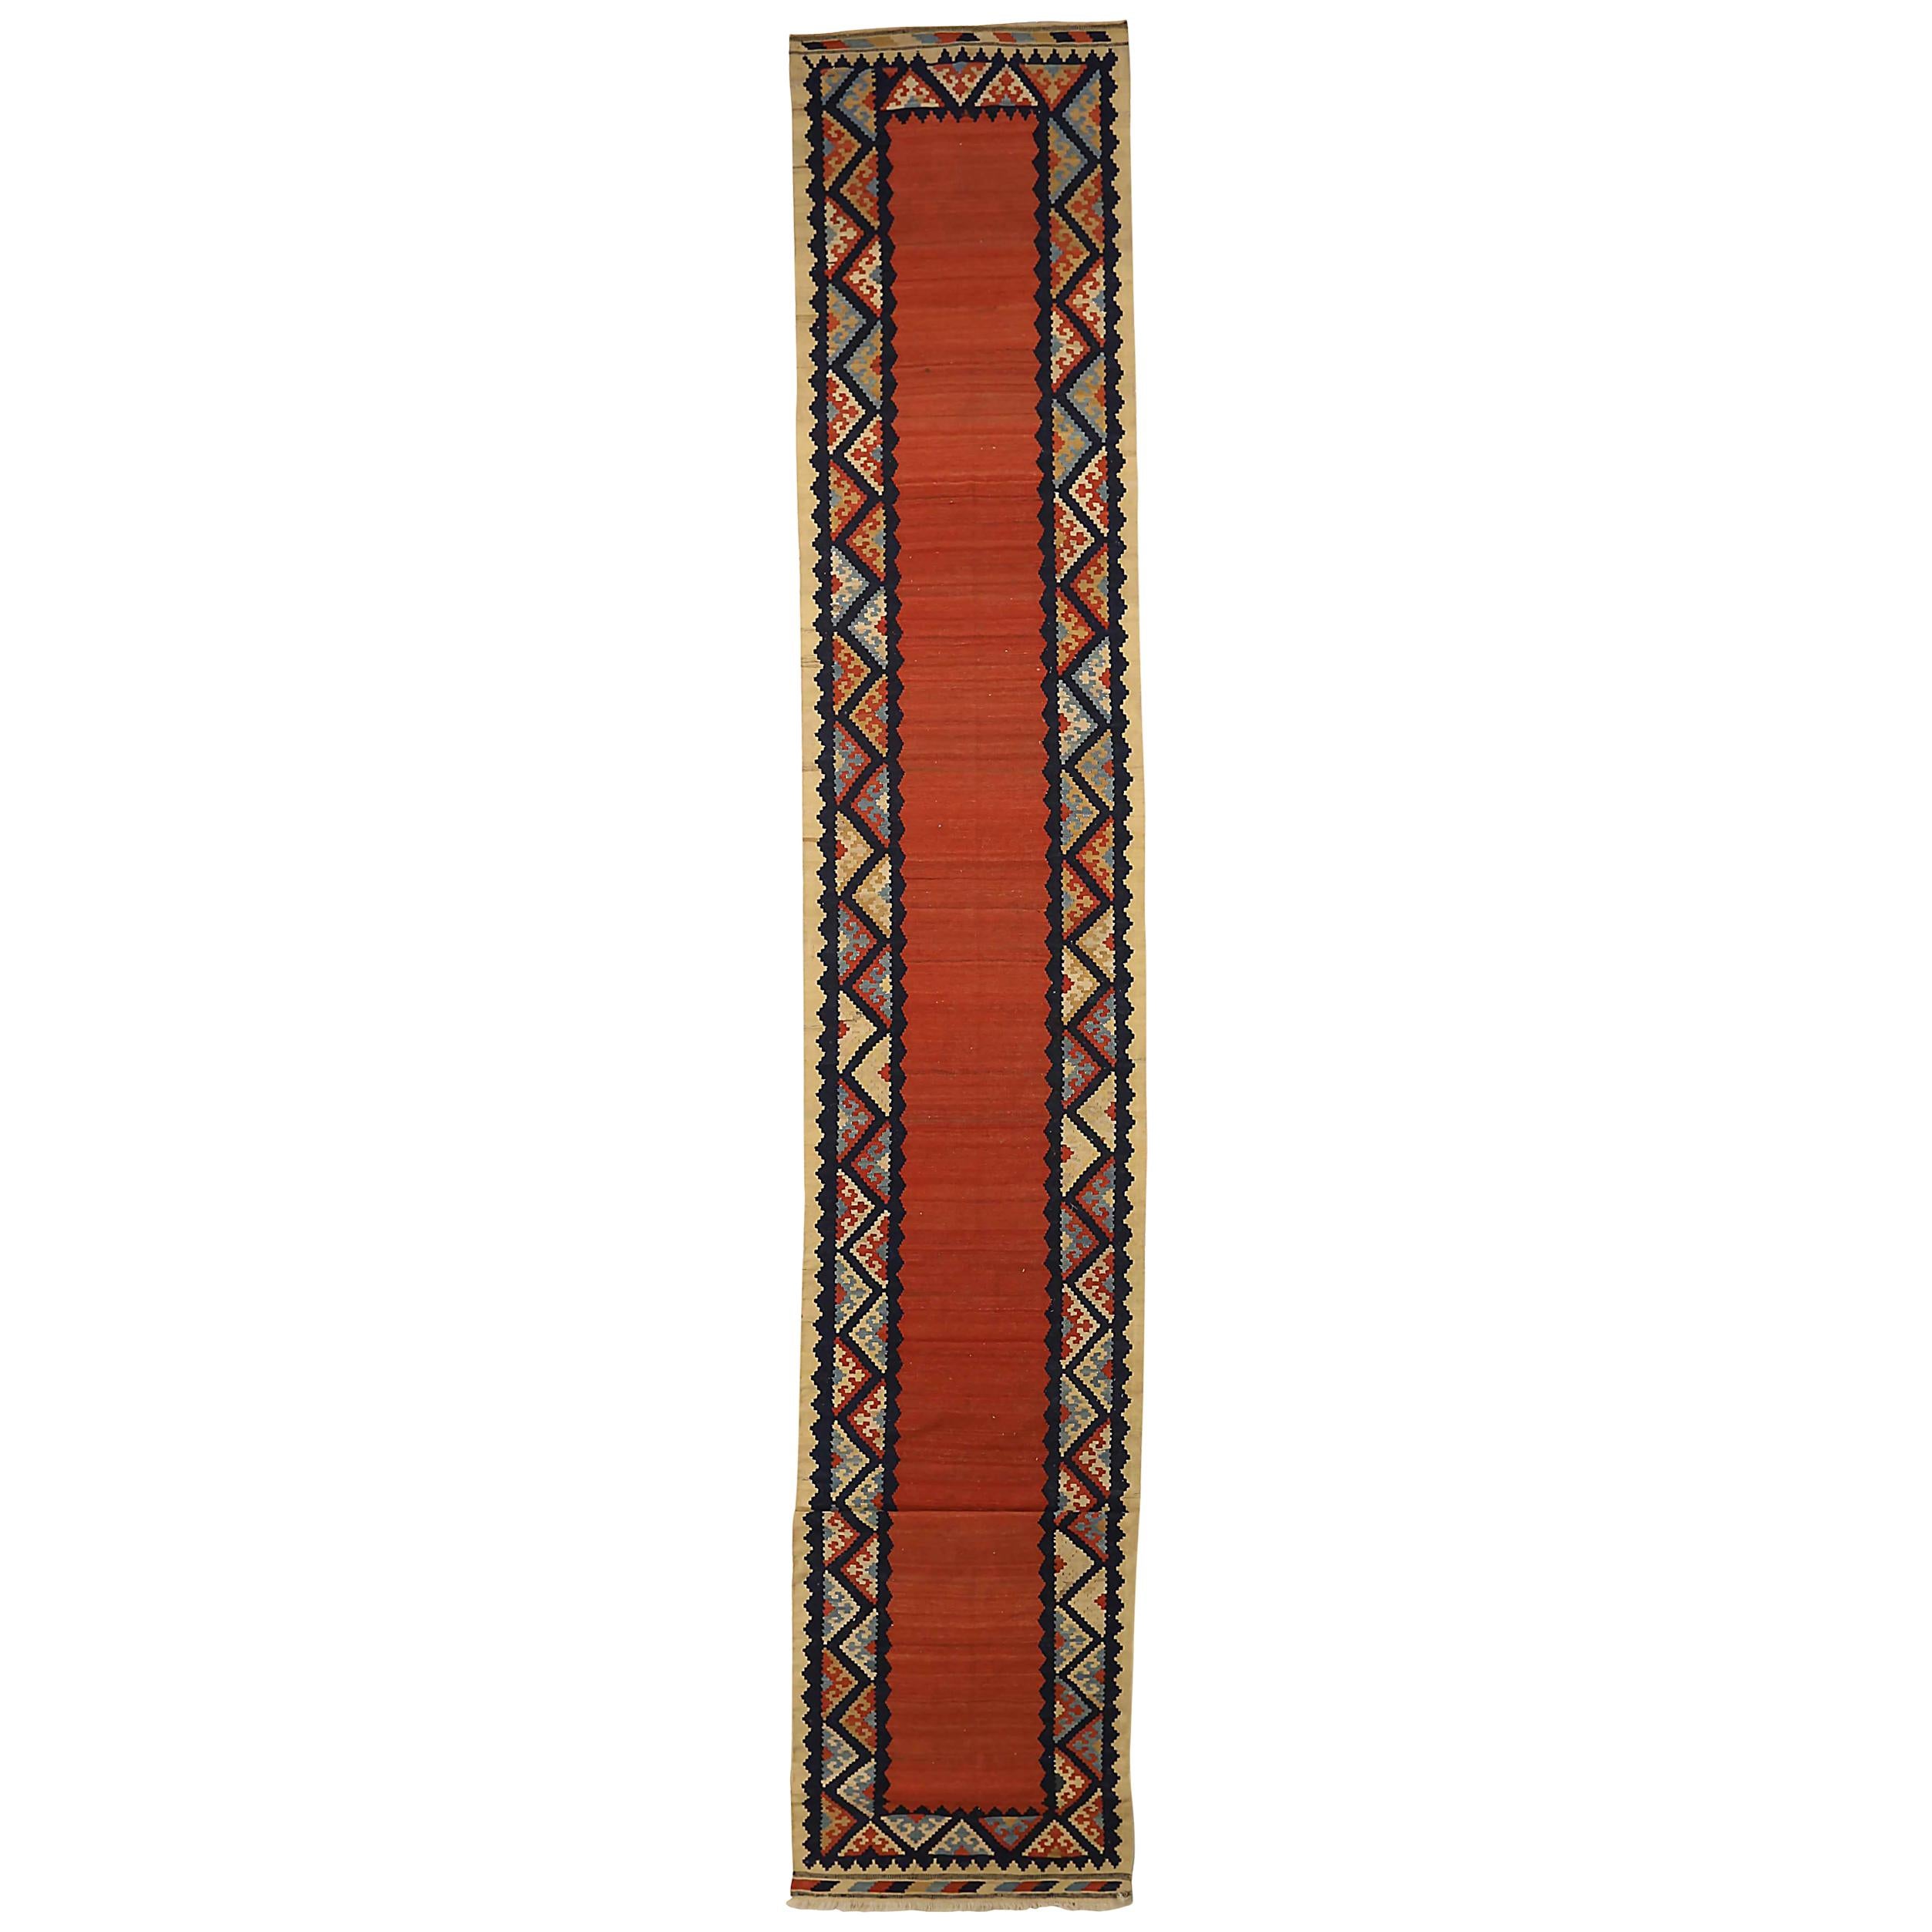 Antique Persian Kilim Runner Rug with Tribal Details on Red/Orange Field